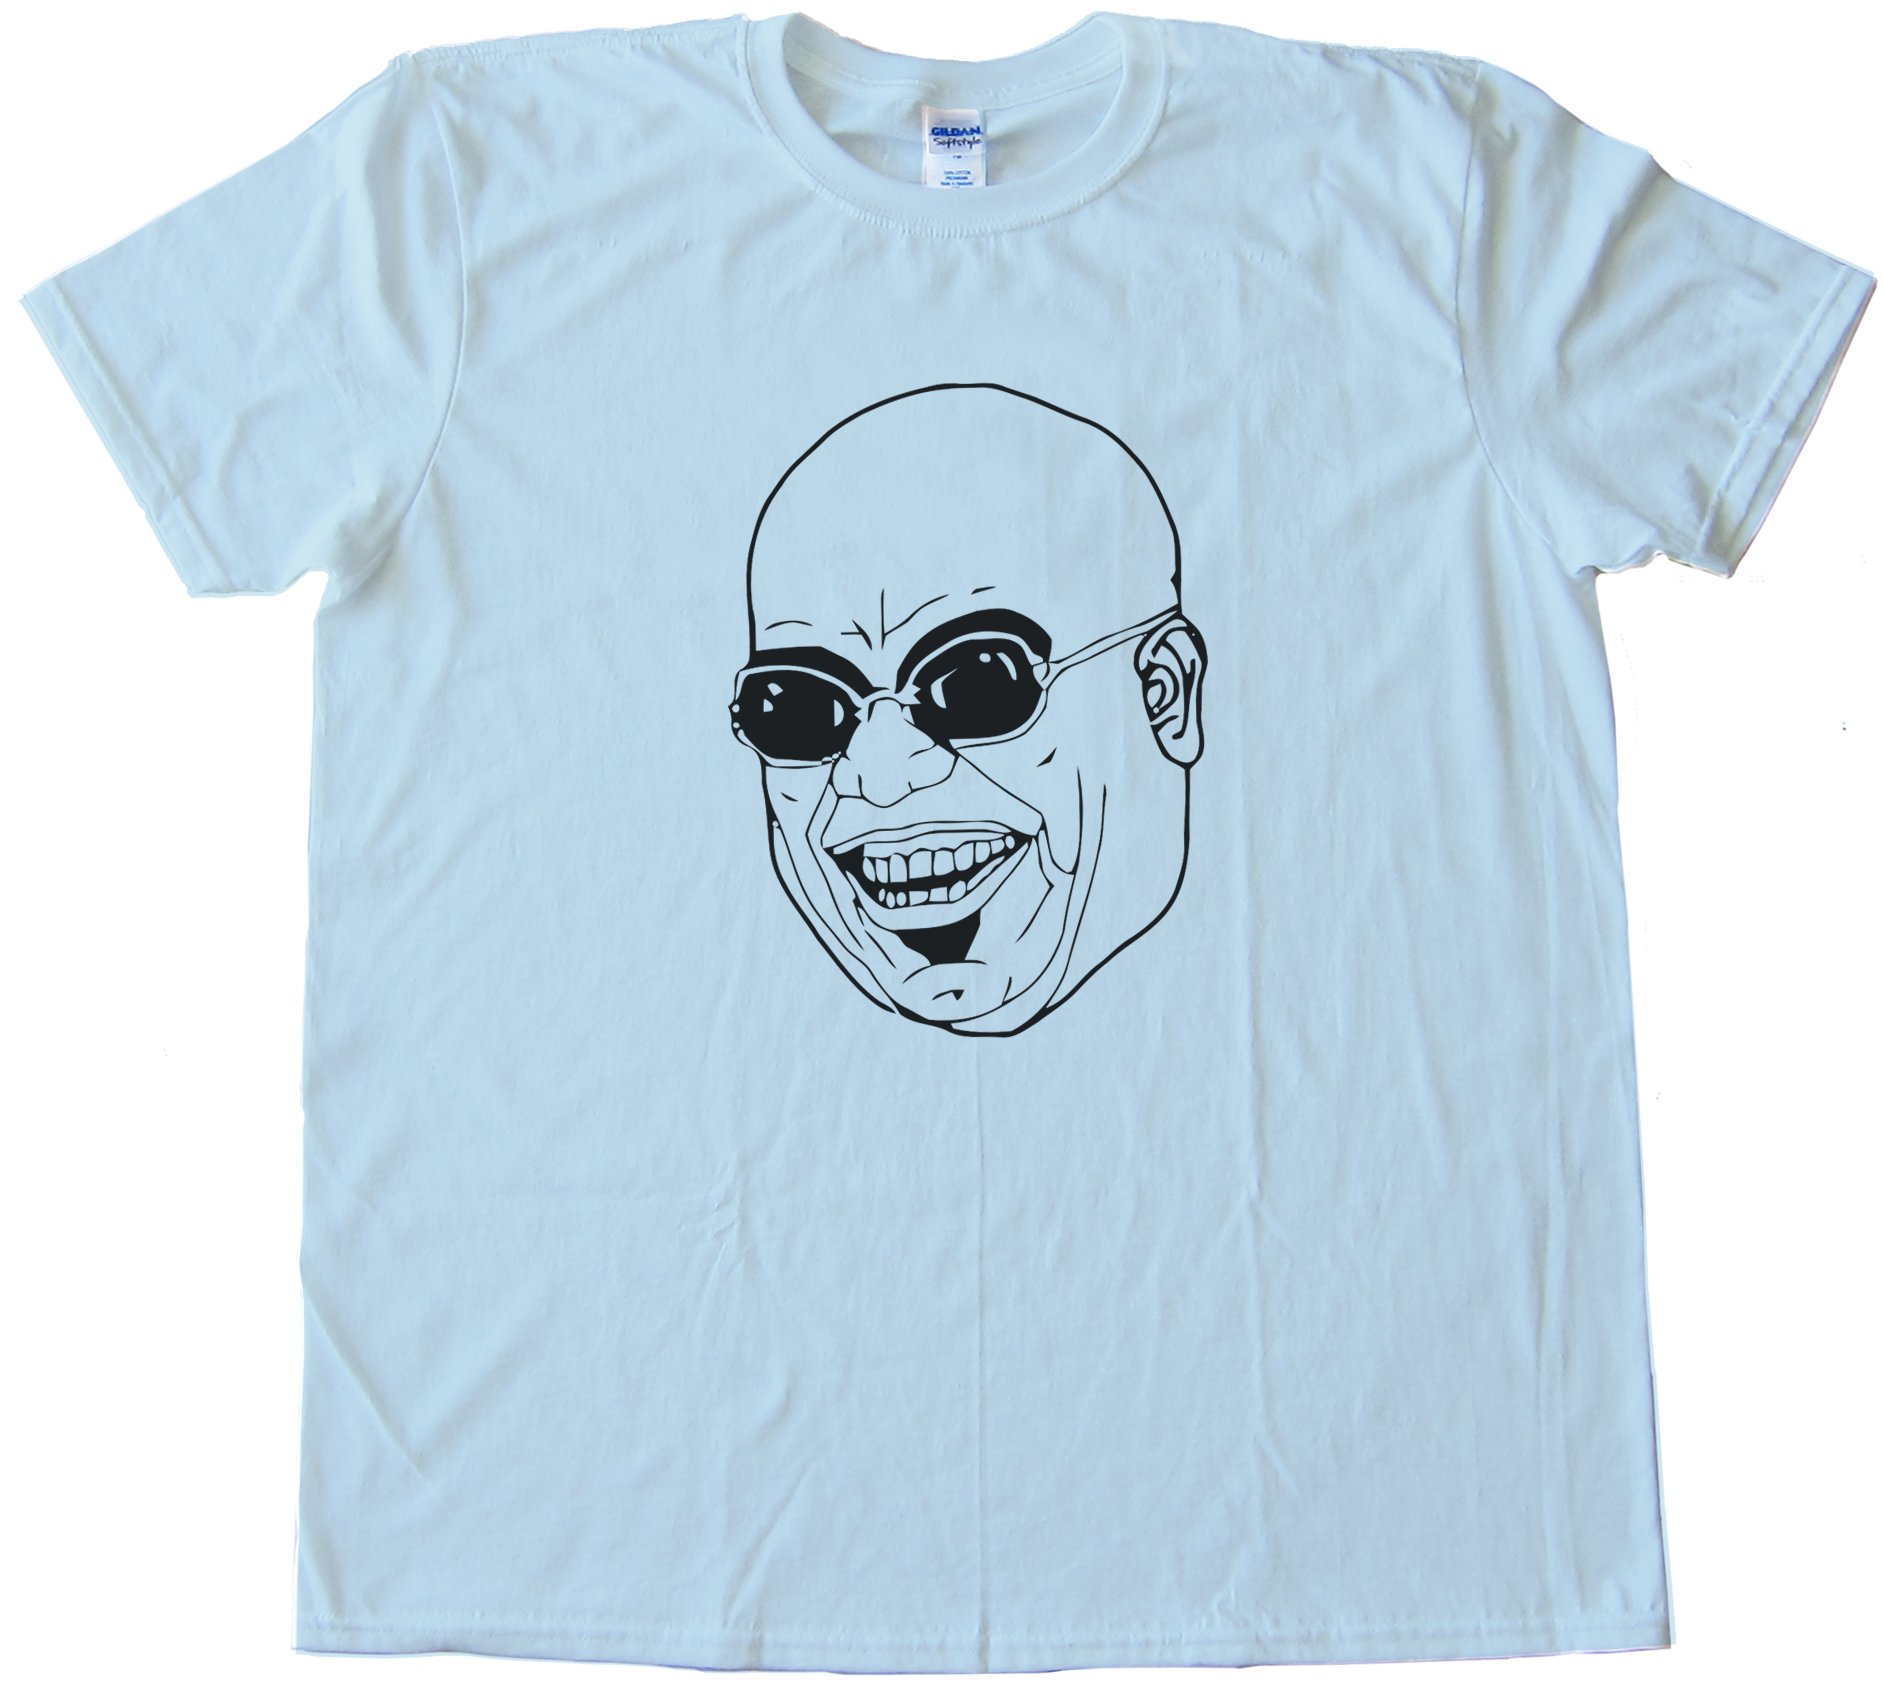 Ain'T That Some Shit Rage Comic Face Tee Shirt